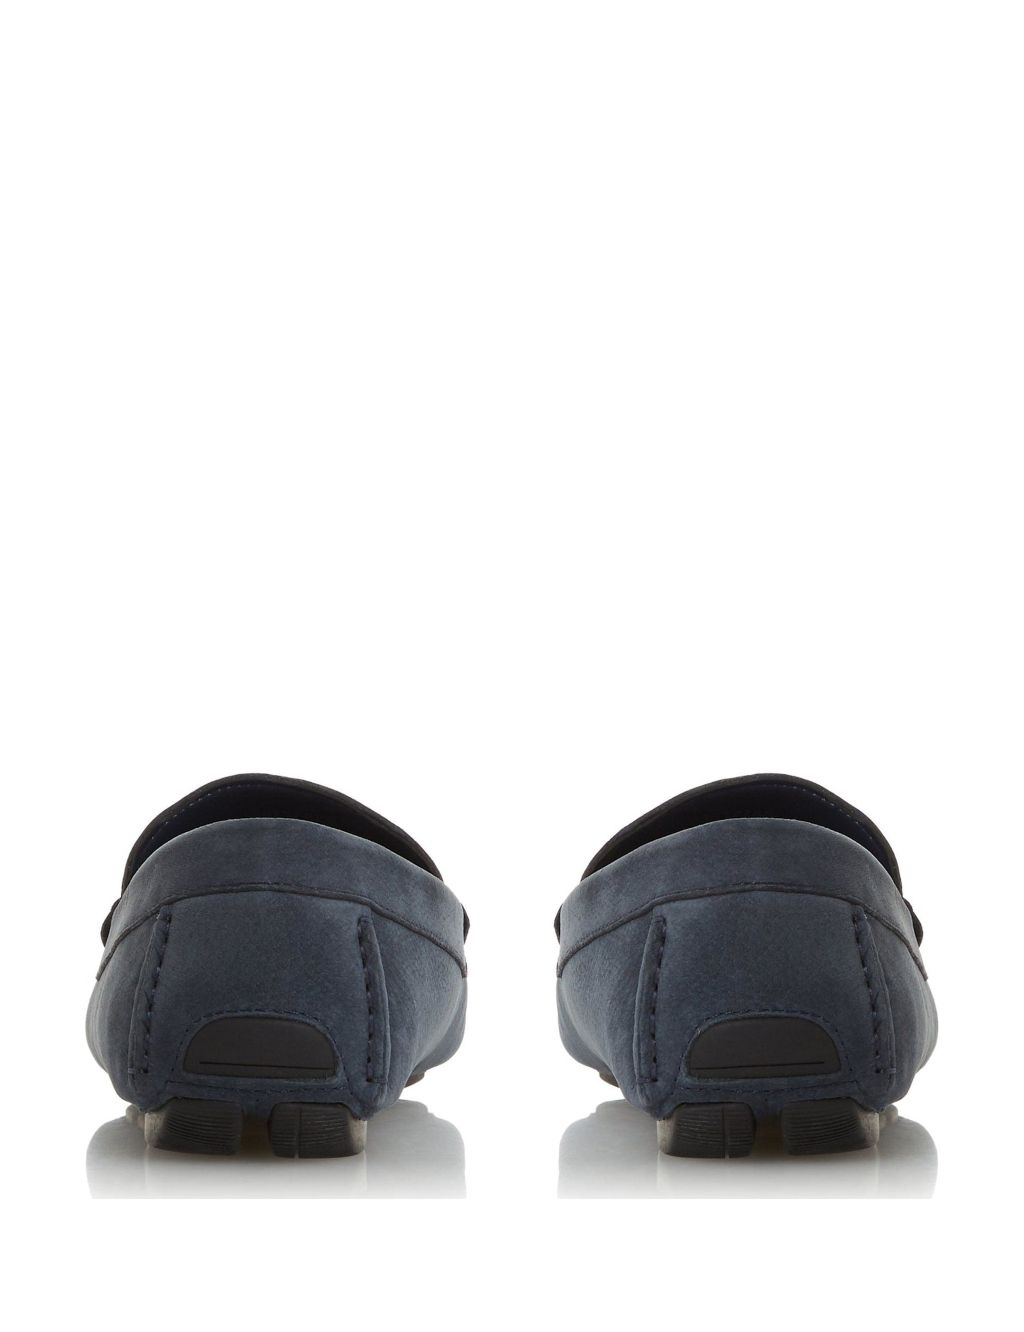 Leather Slip-On Loafers image 4